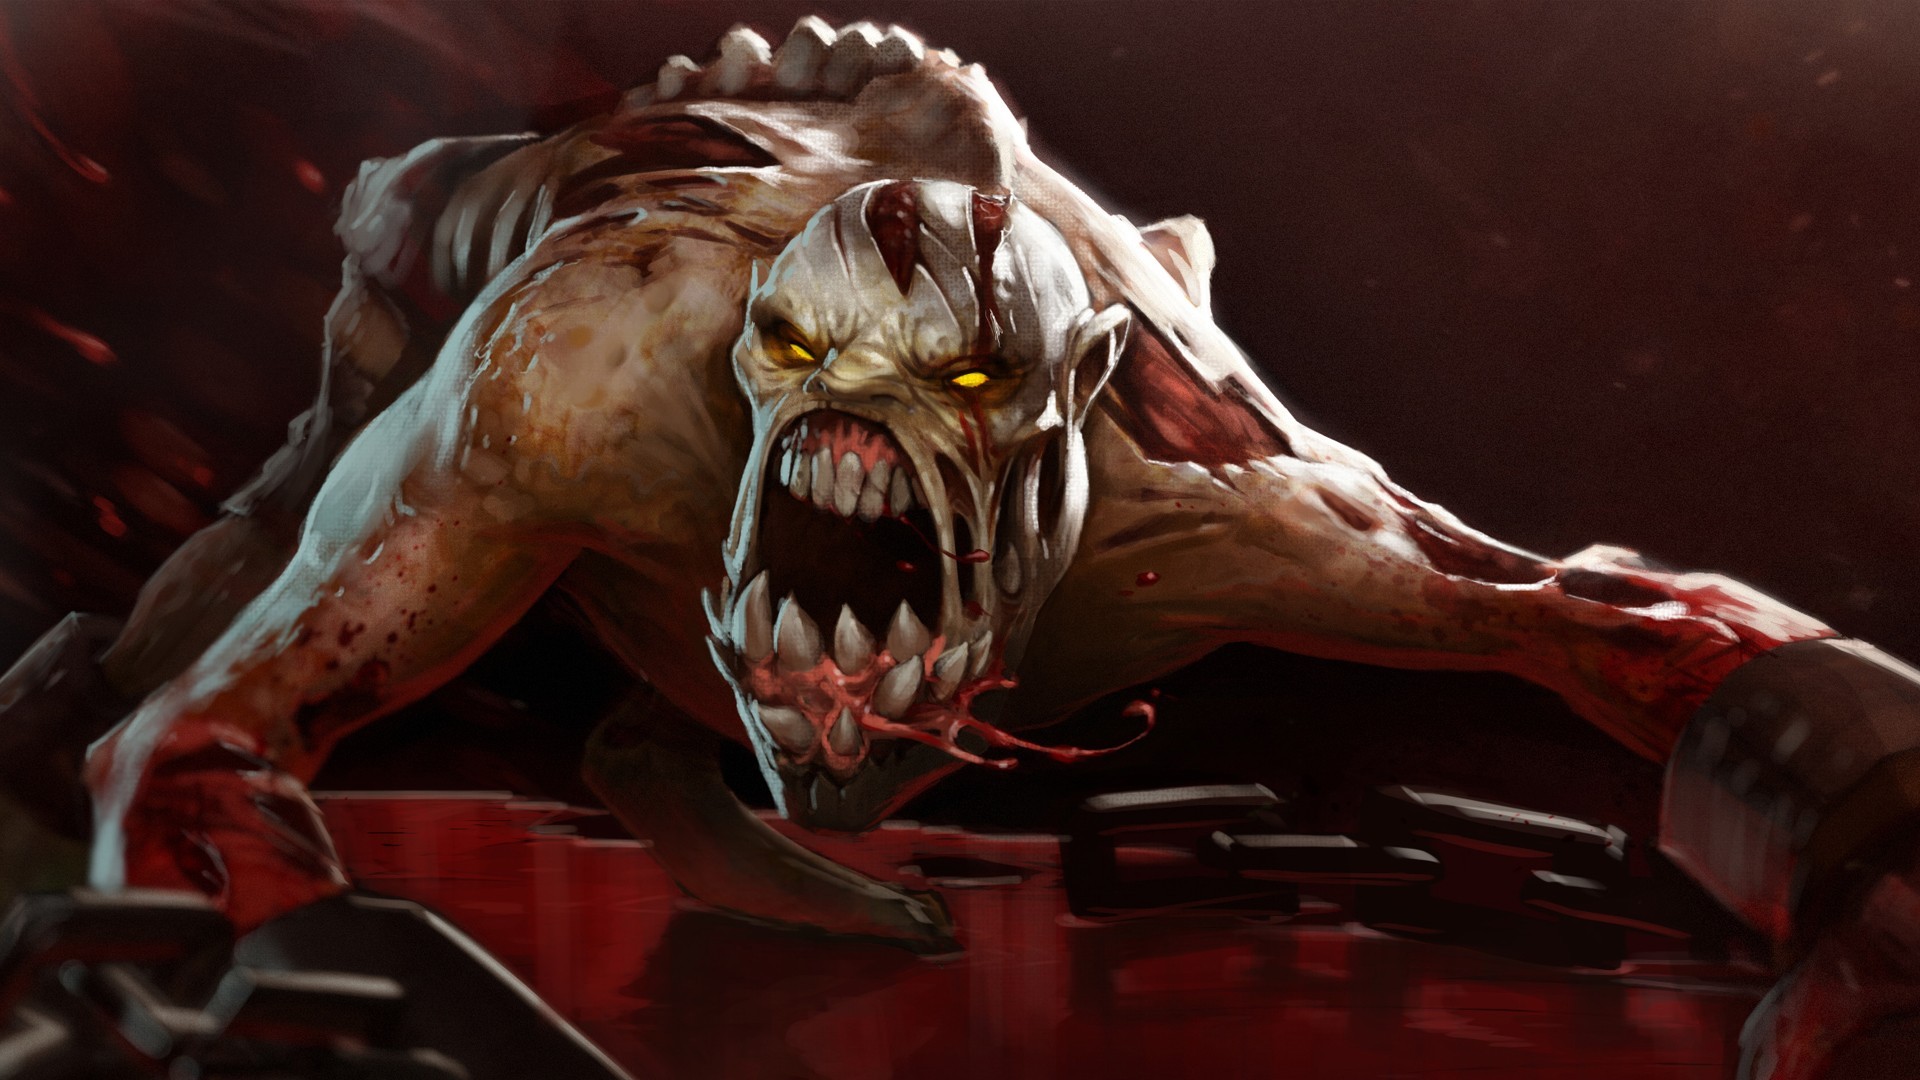 Lifestealer (DotA 2) HD Wallpapers and Backgrounds